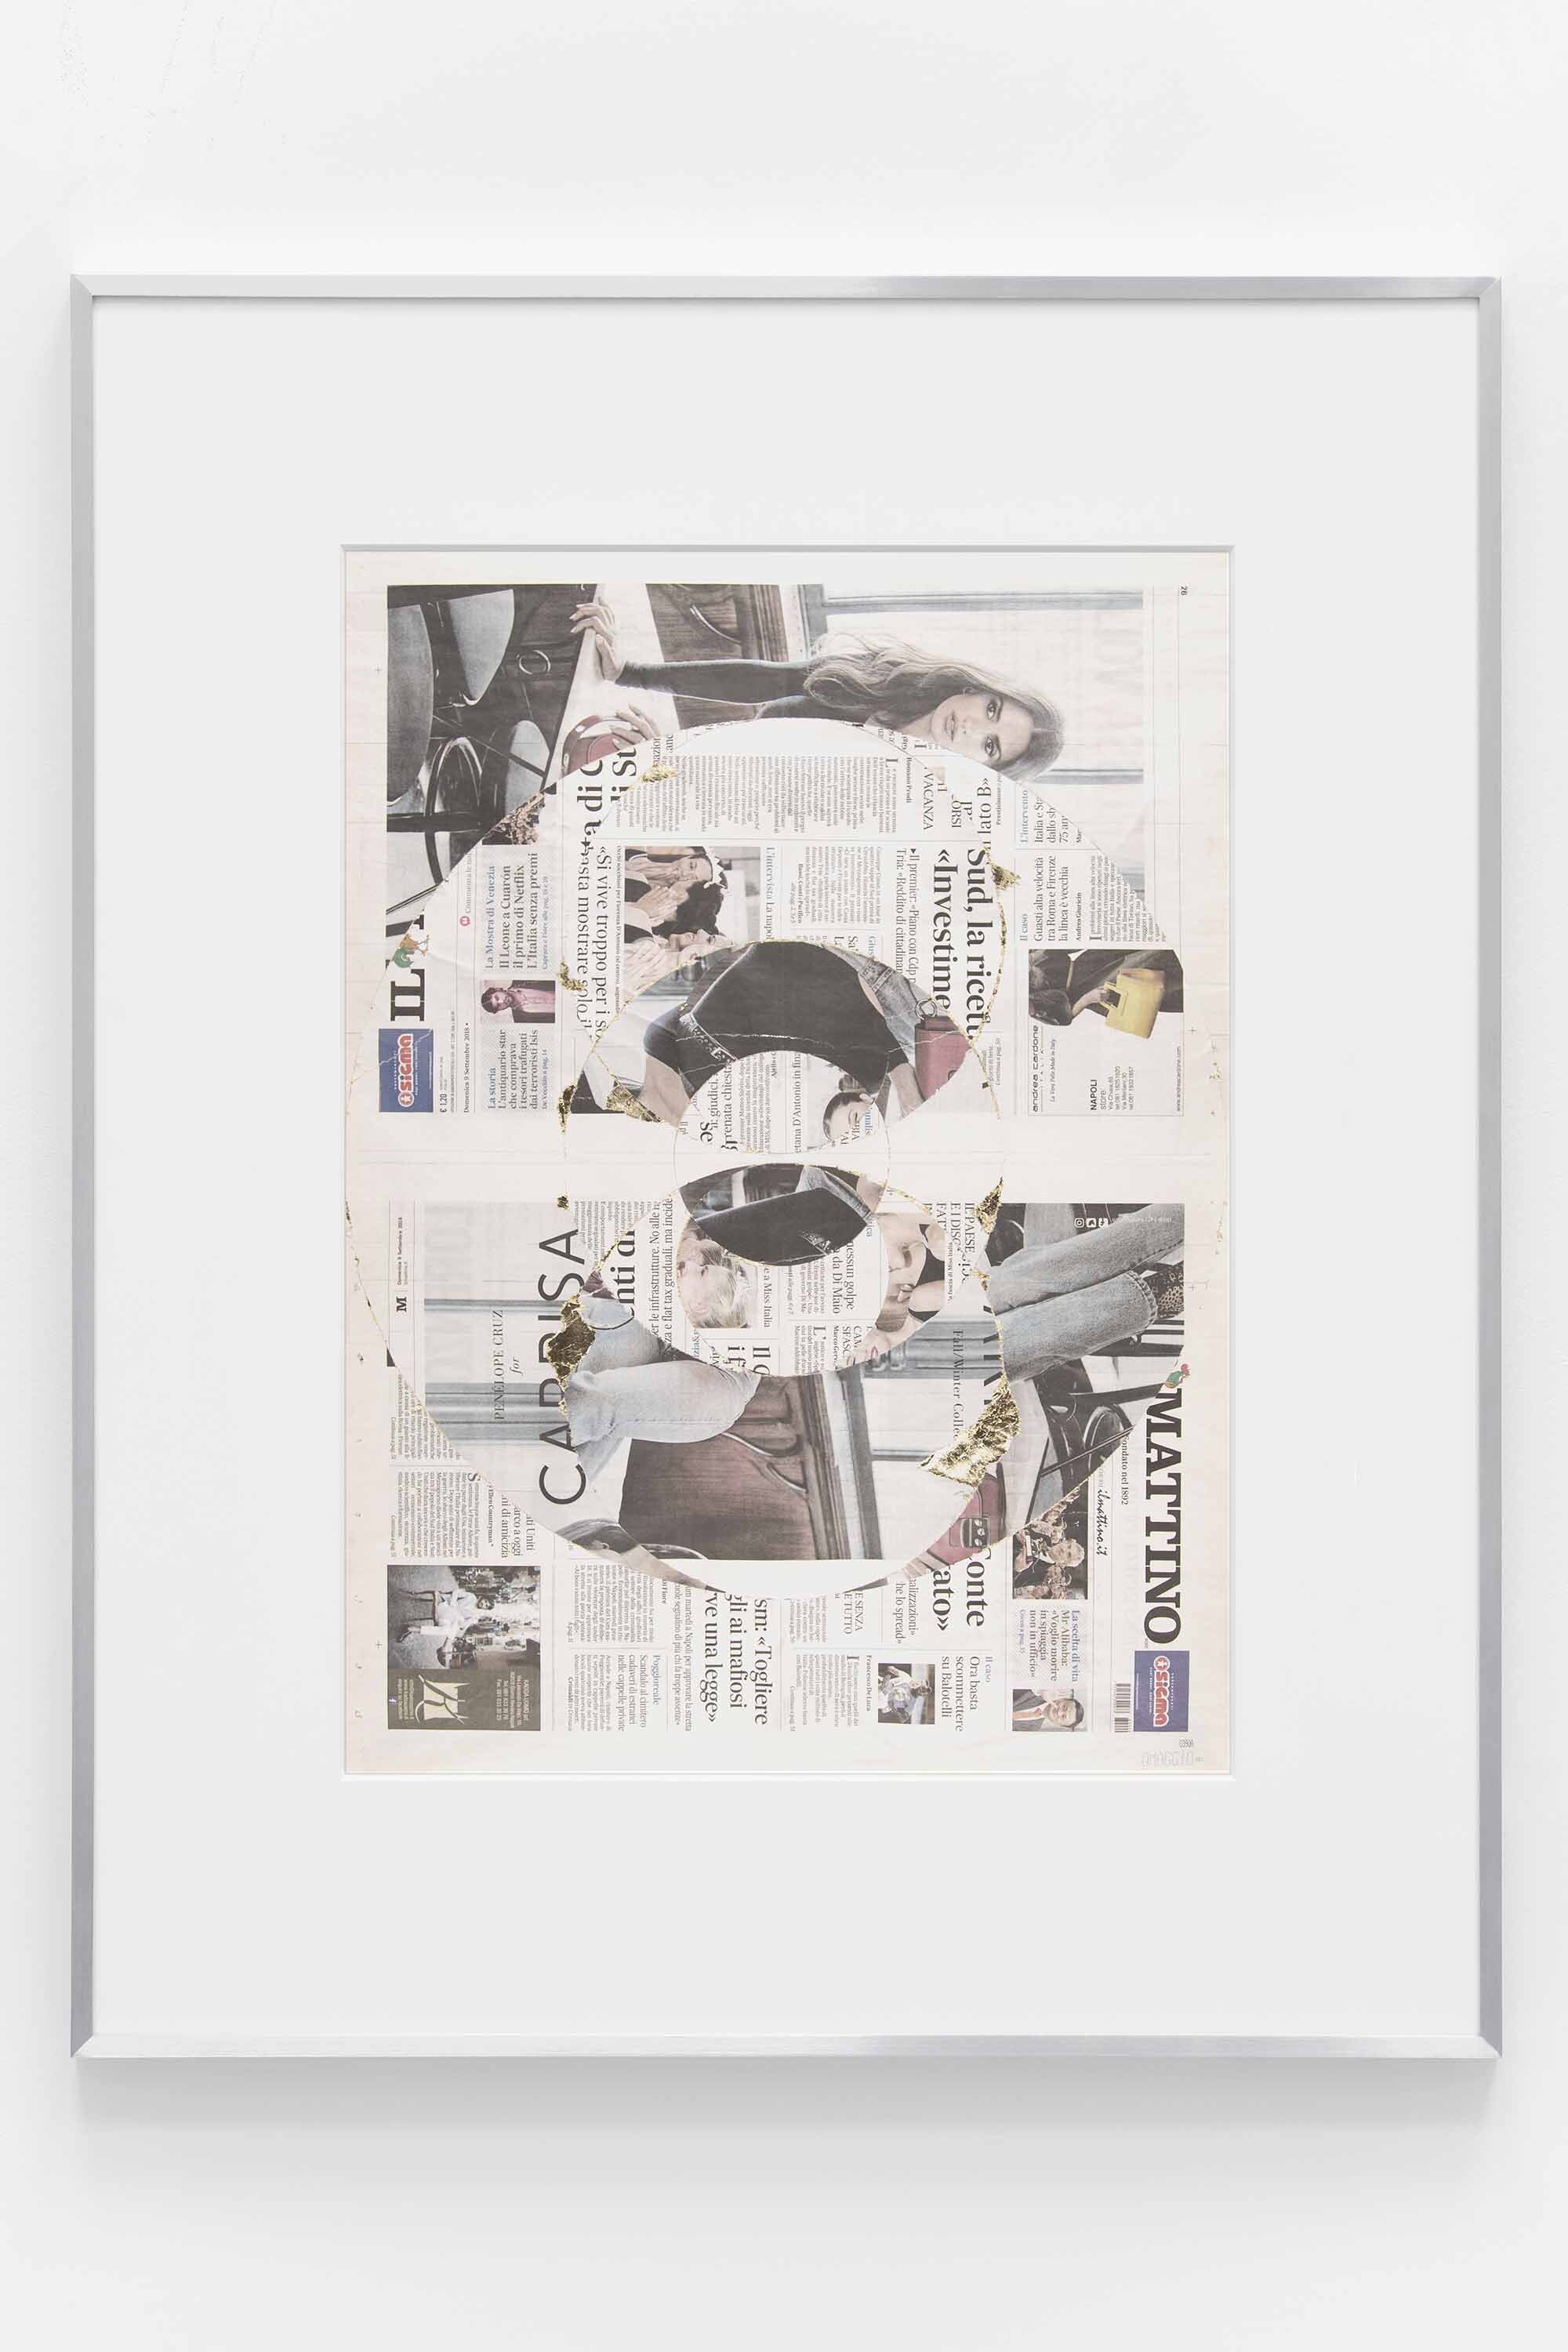   Blind Collage (Seven 180º Rotations, Il Mattino: Naples, Italy, Sunday, September 9, 2018)    2021   Newspaper, tape, and 22 karat gold leaf  39 1/8 x 31 1/4 inches  Exhibition:   Foreign Correspondence, 2021  